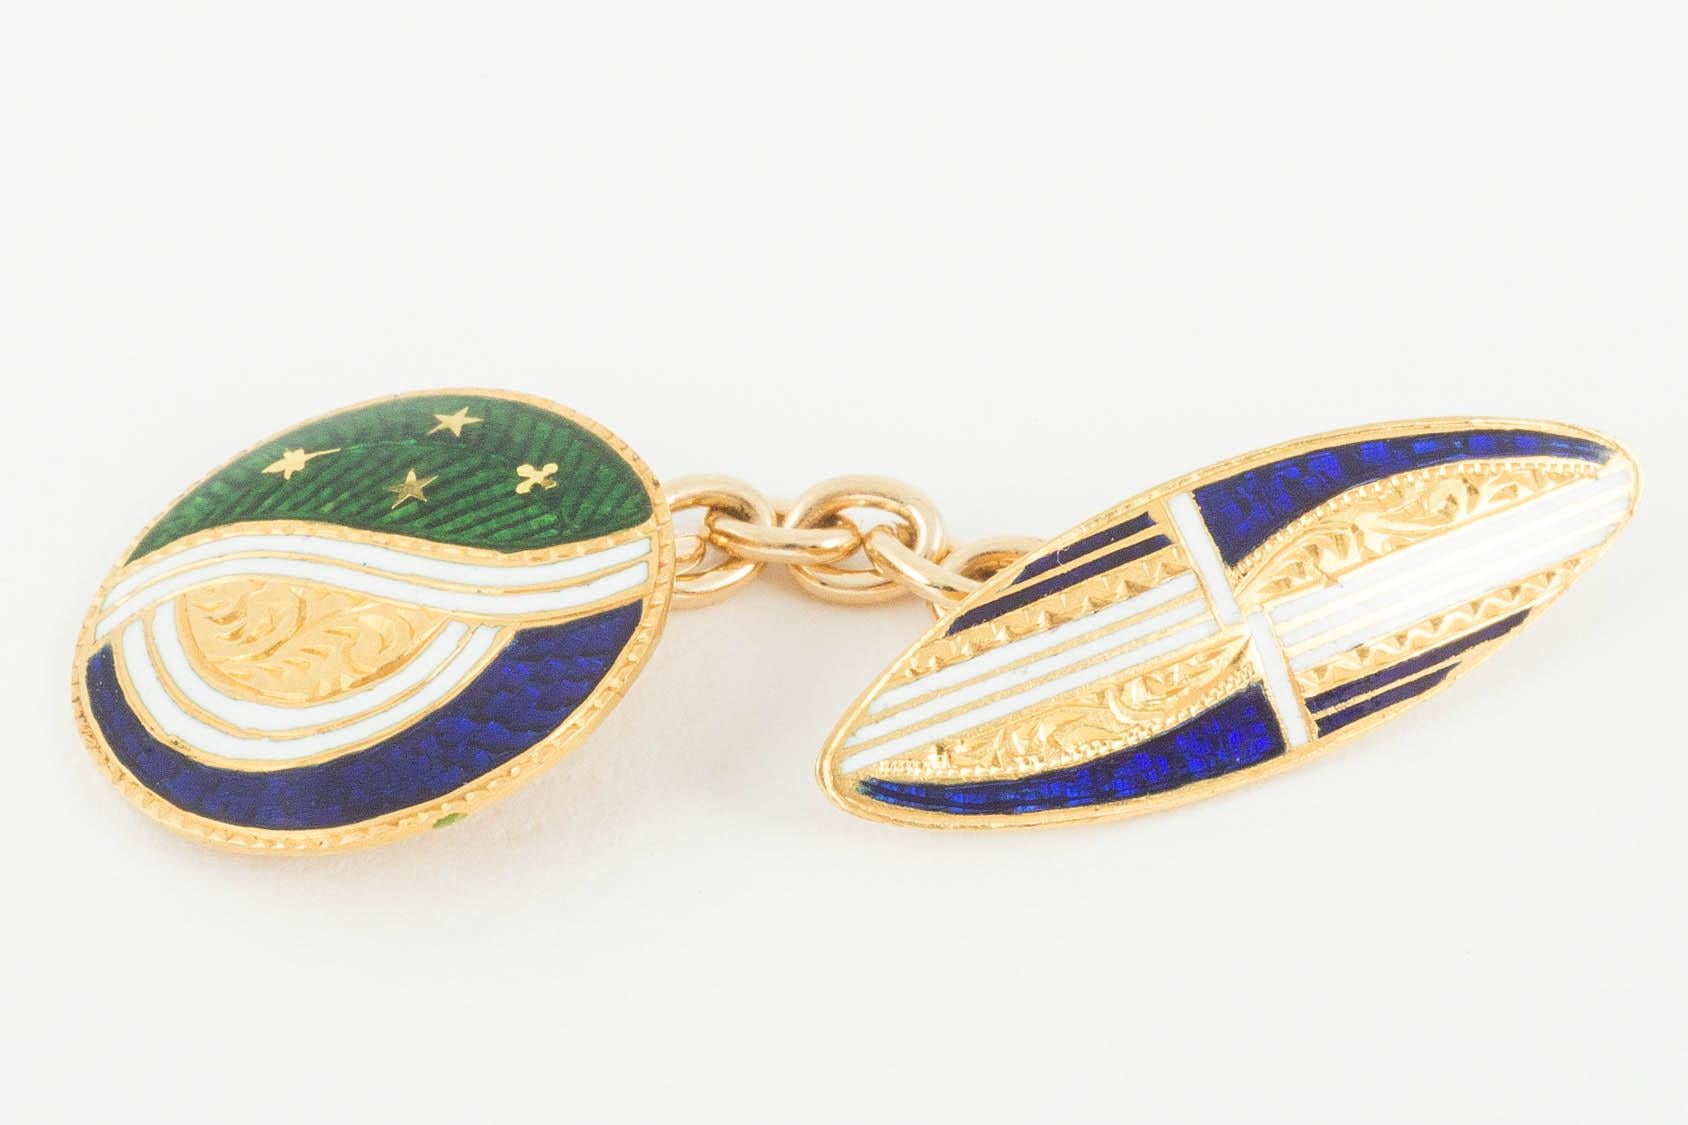 Edwardian Cufflinks and Four Buttons in Colored Enamel, and 14 Karat Gold, circa 1910